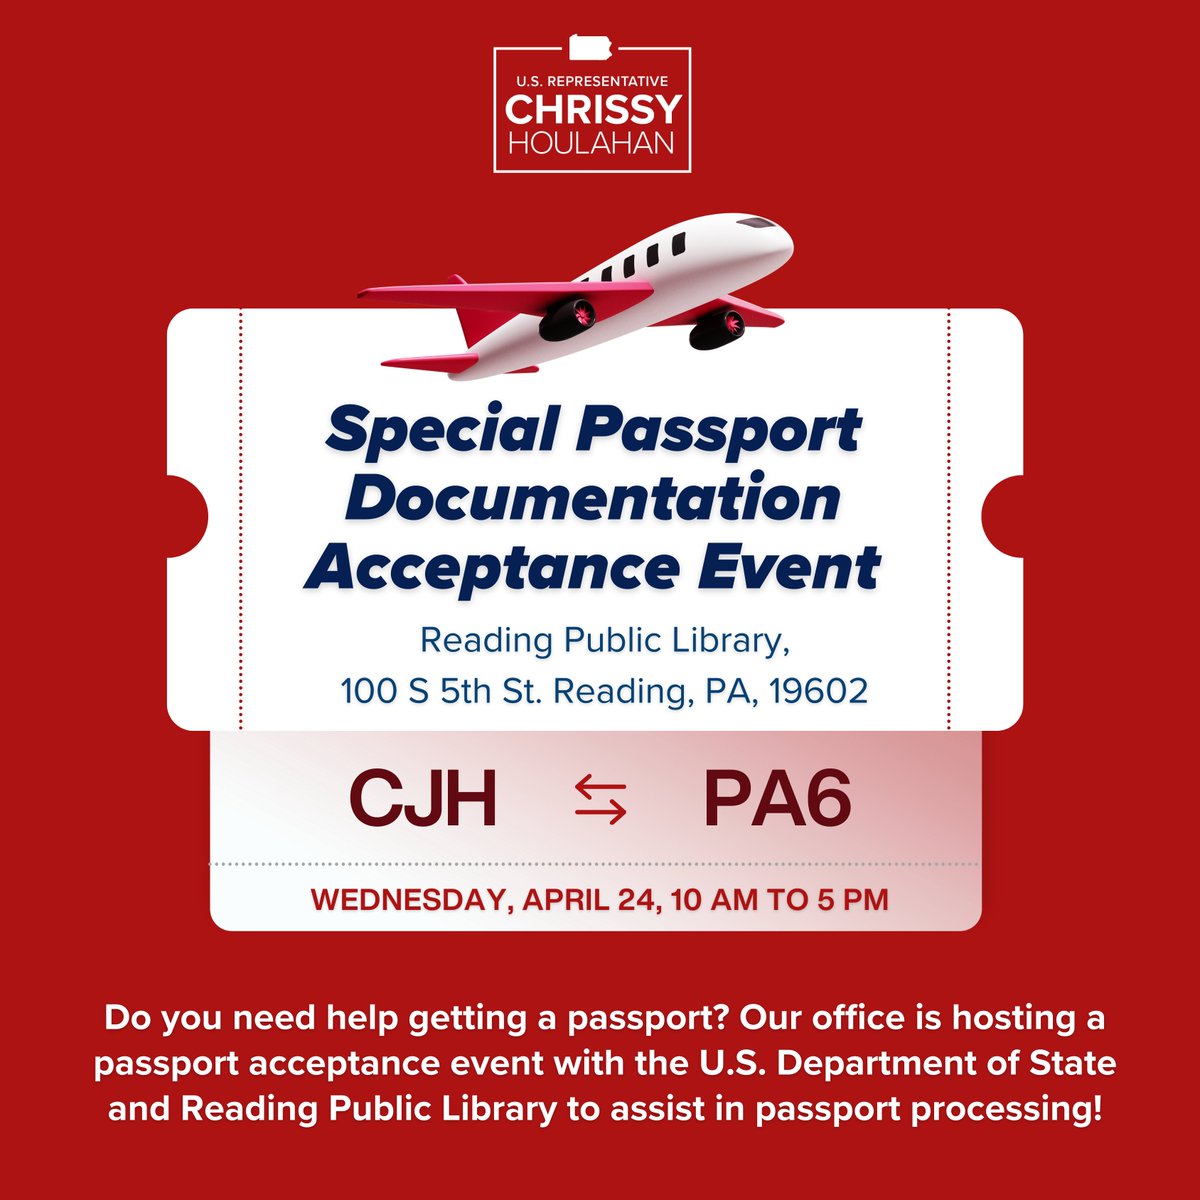 Do you need assistance in getting your passport processed? My office is hosting a passport documentation acceptance event with the @StateDept and the Reading Public Library on Wednesday, April 24. The event will run from 10 a.m. to 5 p.m. RSVP at houlahan.house.gov/forms/form/?ID…